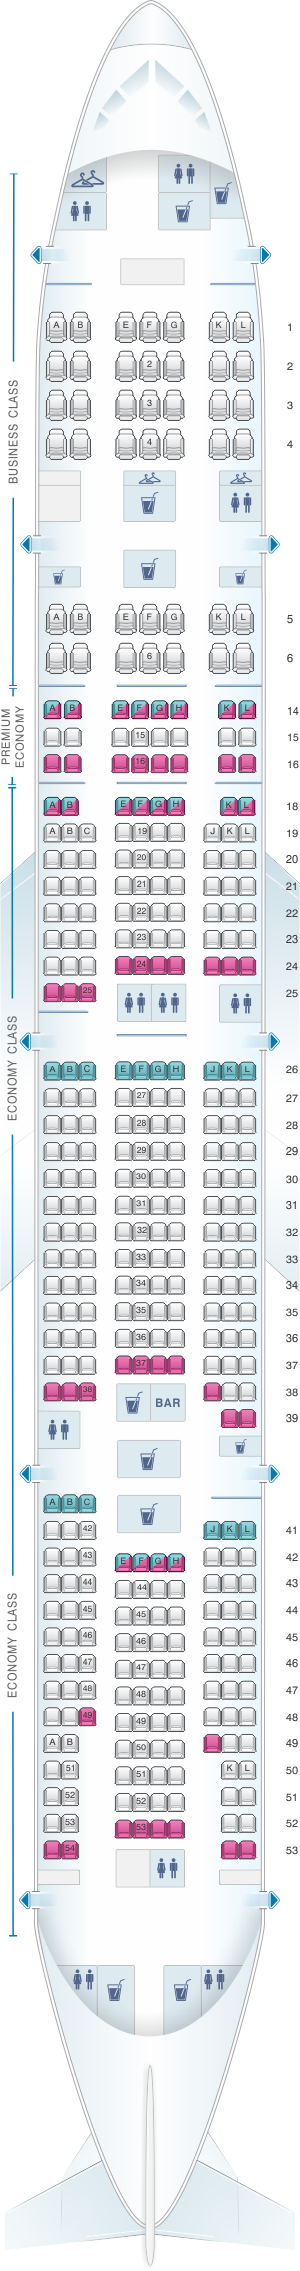 777-300 air france seat map